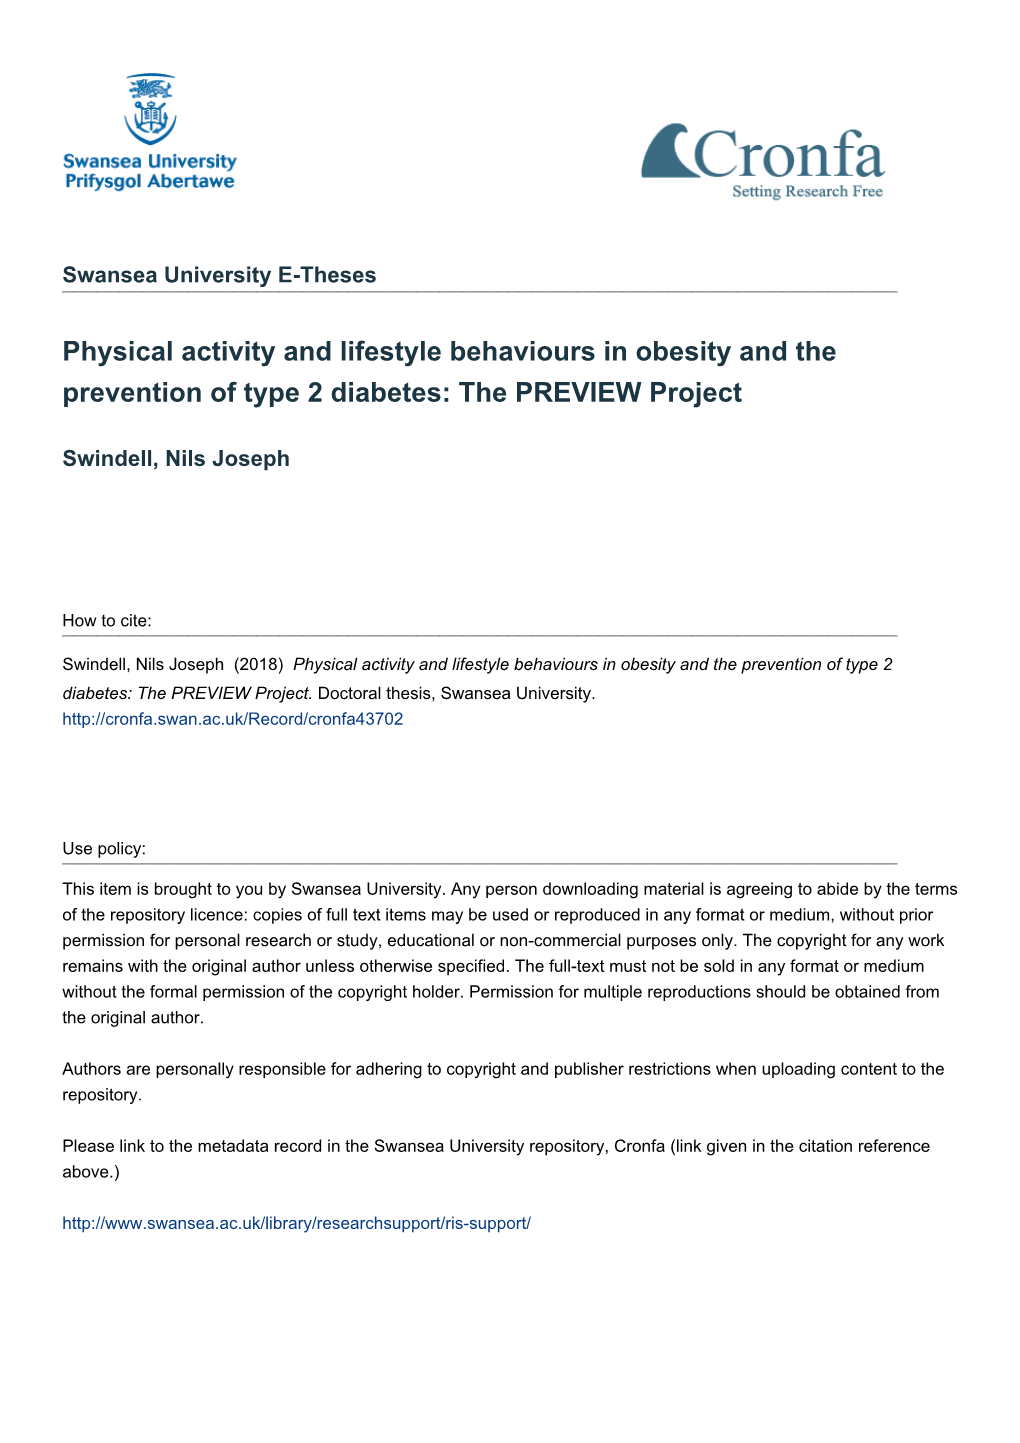 Physical Activity and Lifestyle Behaviours in Obesity and the Prevention of Type 2 Diabetes: the PREVIEW Project